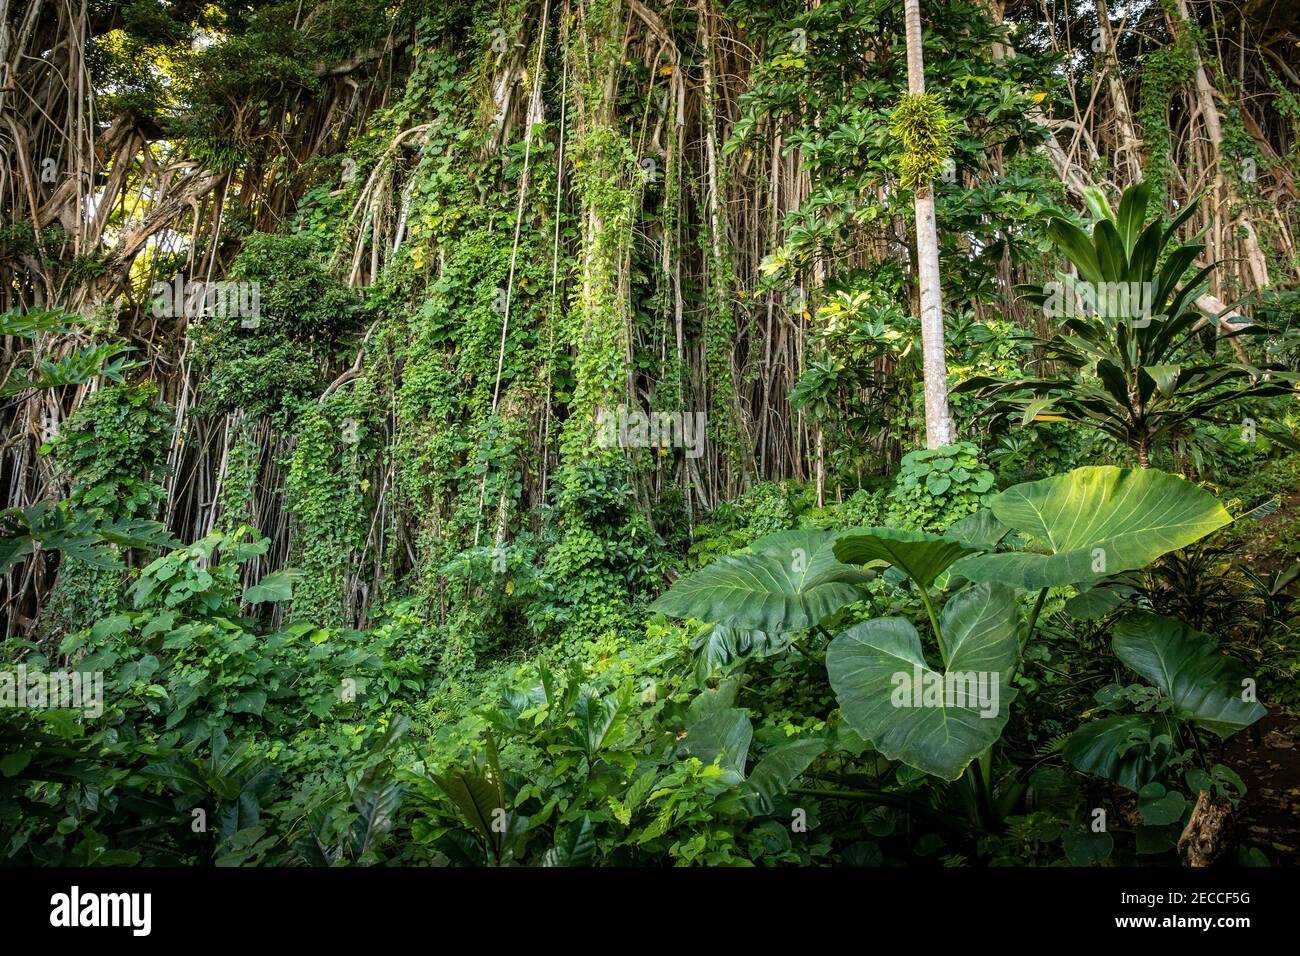 Explore the lush beauty of Vanuatu's untouched rainforest, adorned with vibrant green plants like lianas, banyan trees, alocasia, and palms Stock Photo